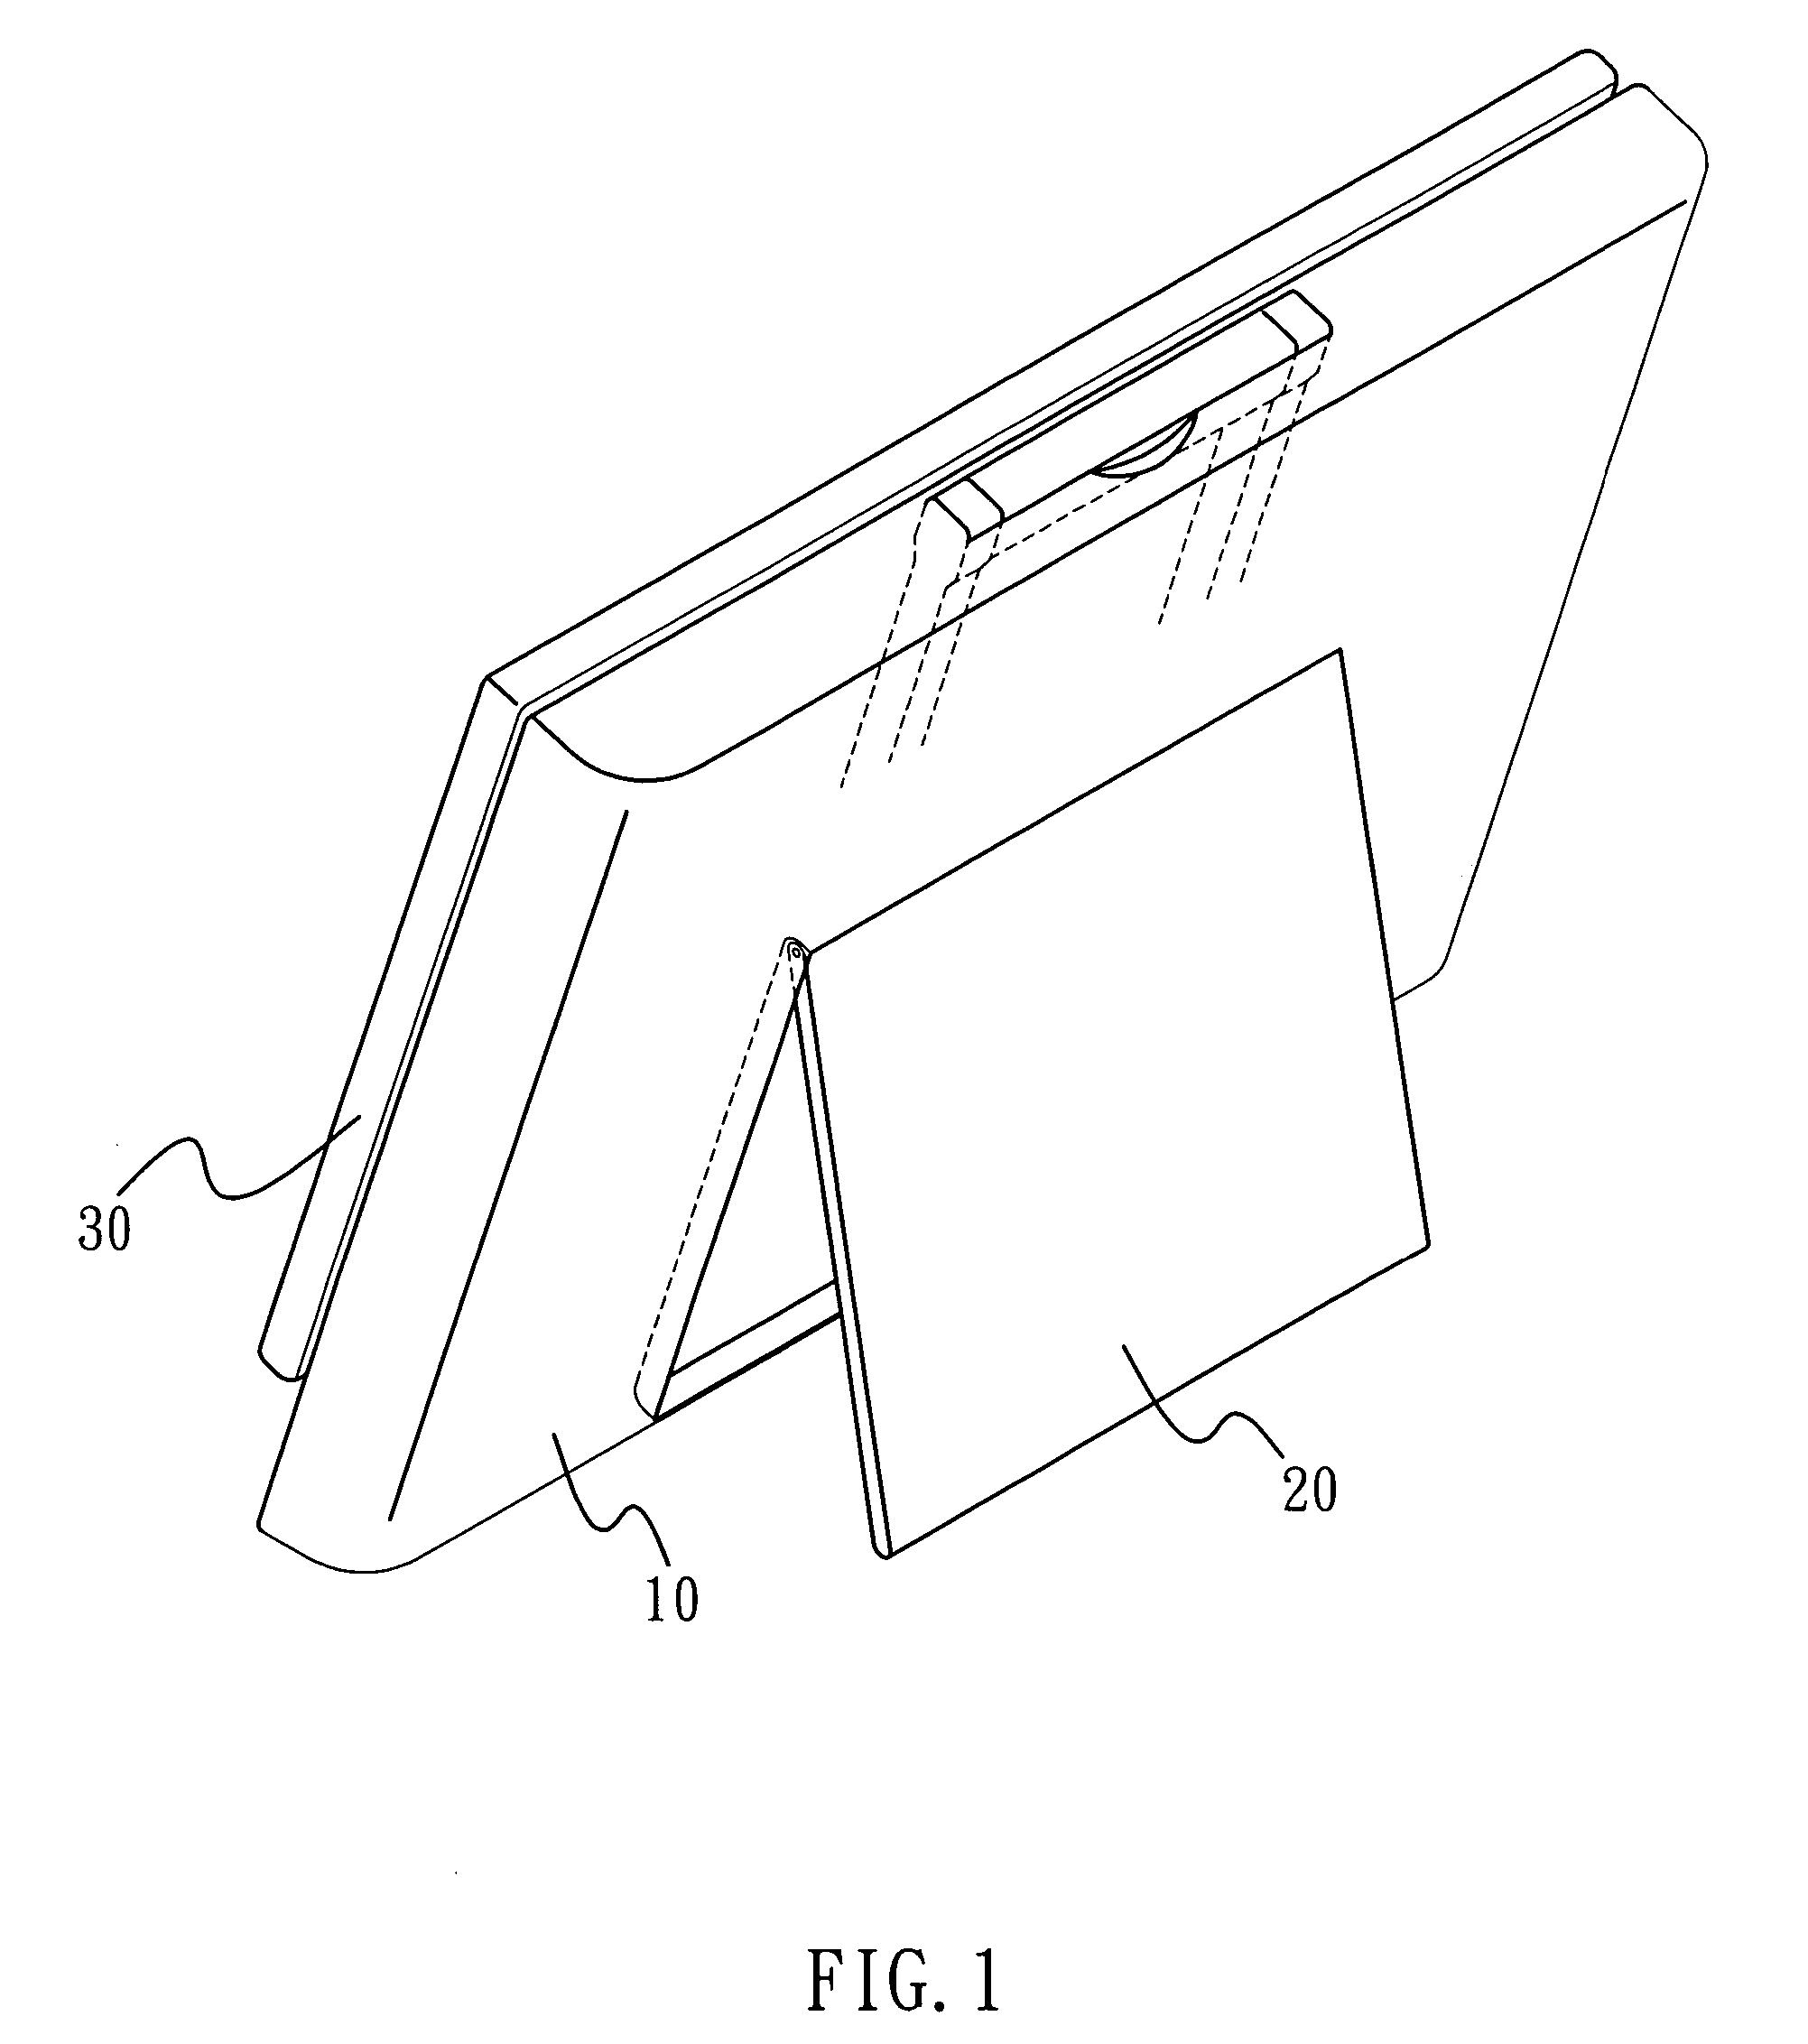 Display moveable in two dimensions